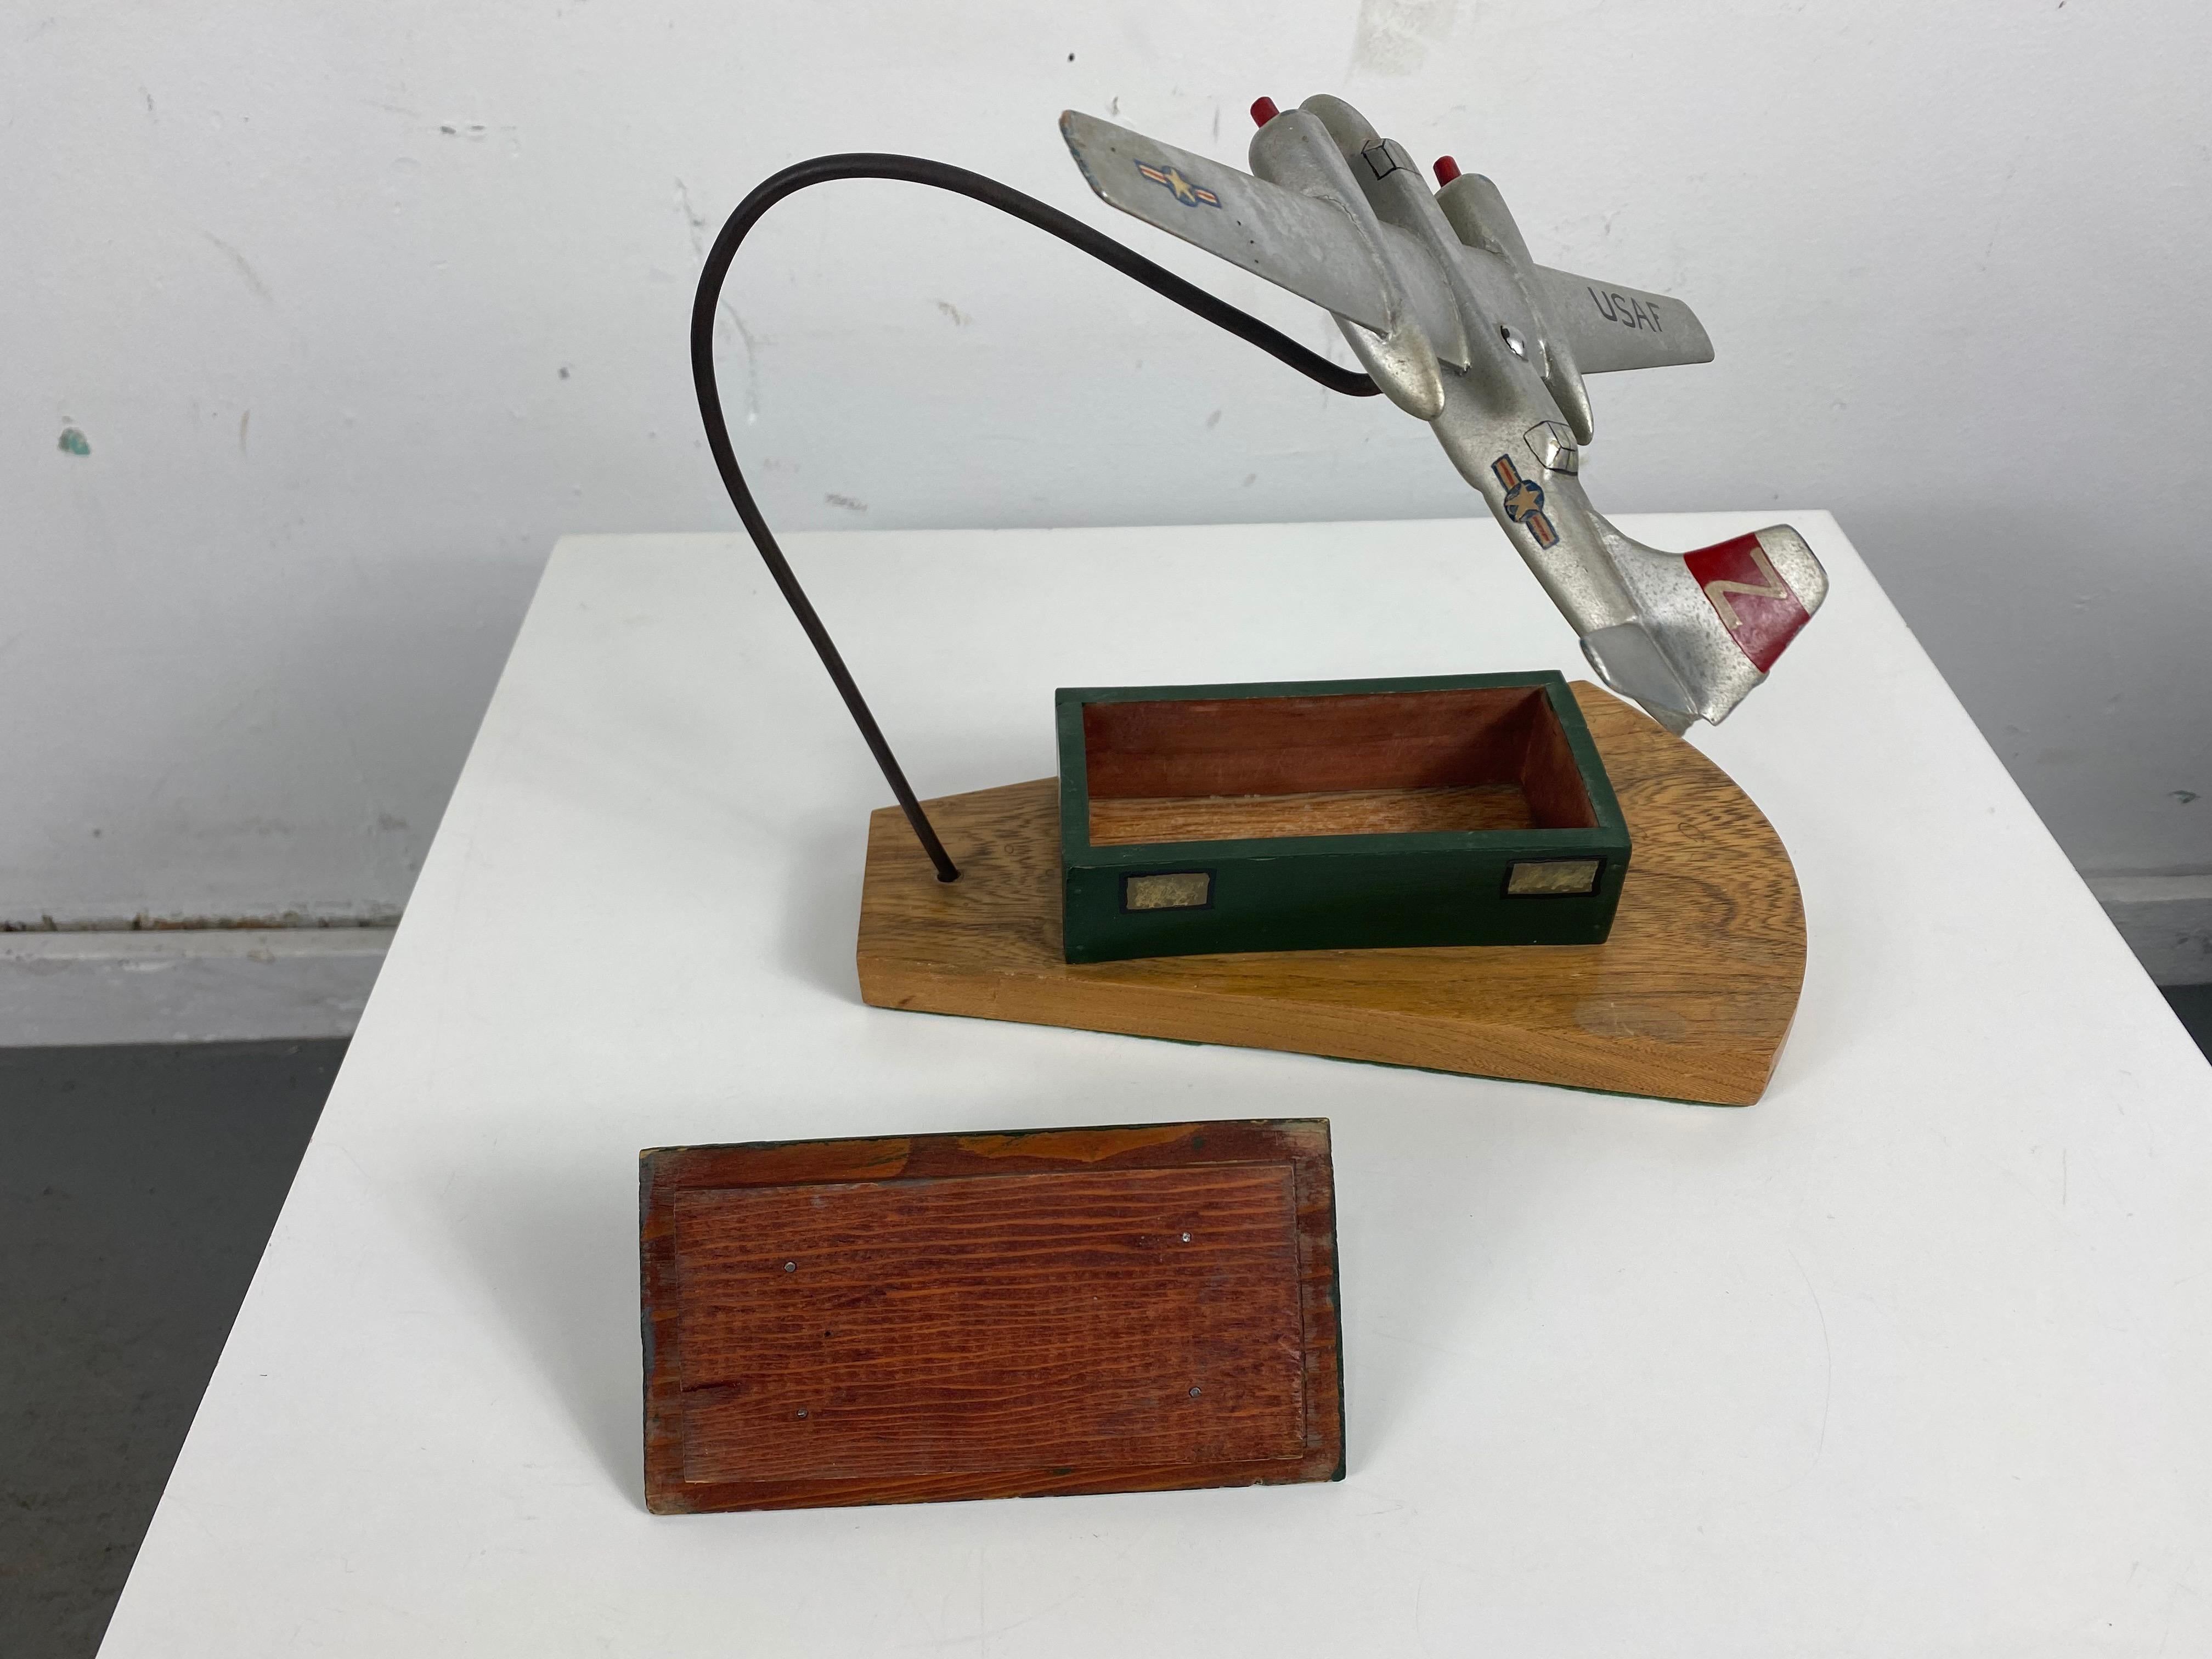 Folk Art, Hand Executed Modernist, Art Deco Airplane /Trinket Box In Good Condition For Sale In Buffalo, NY